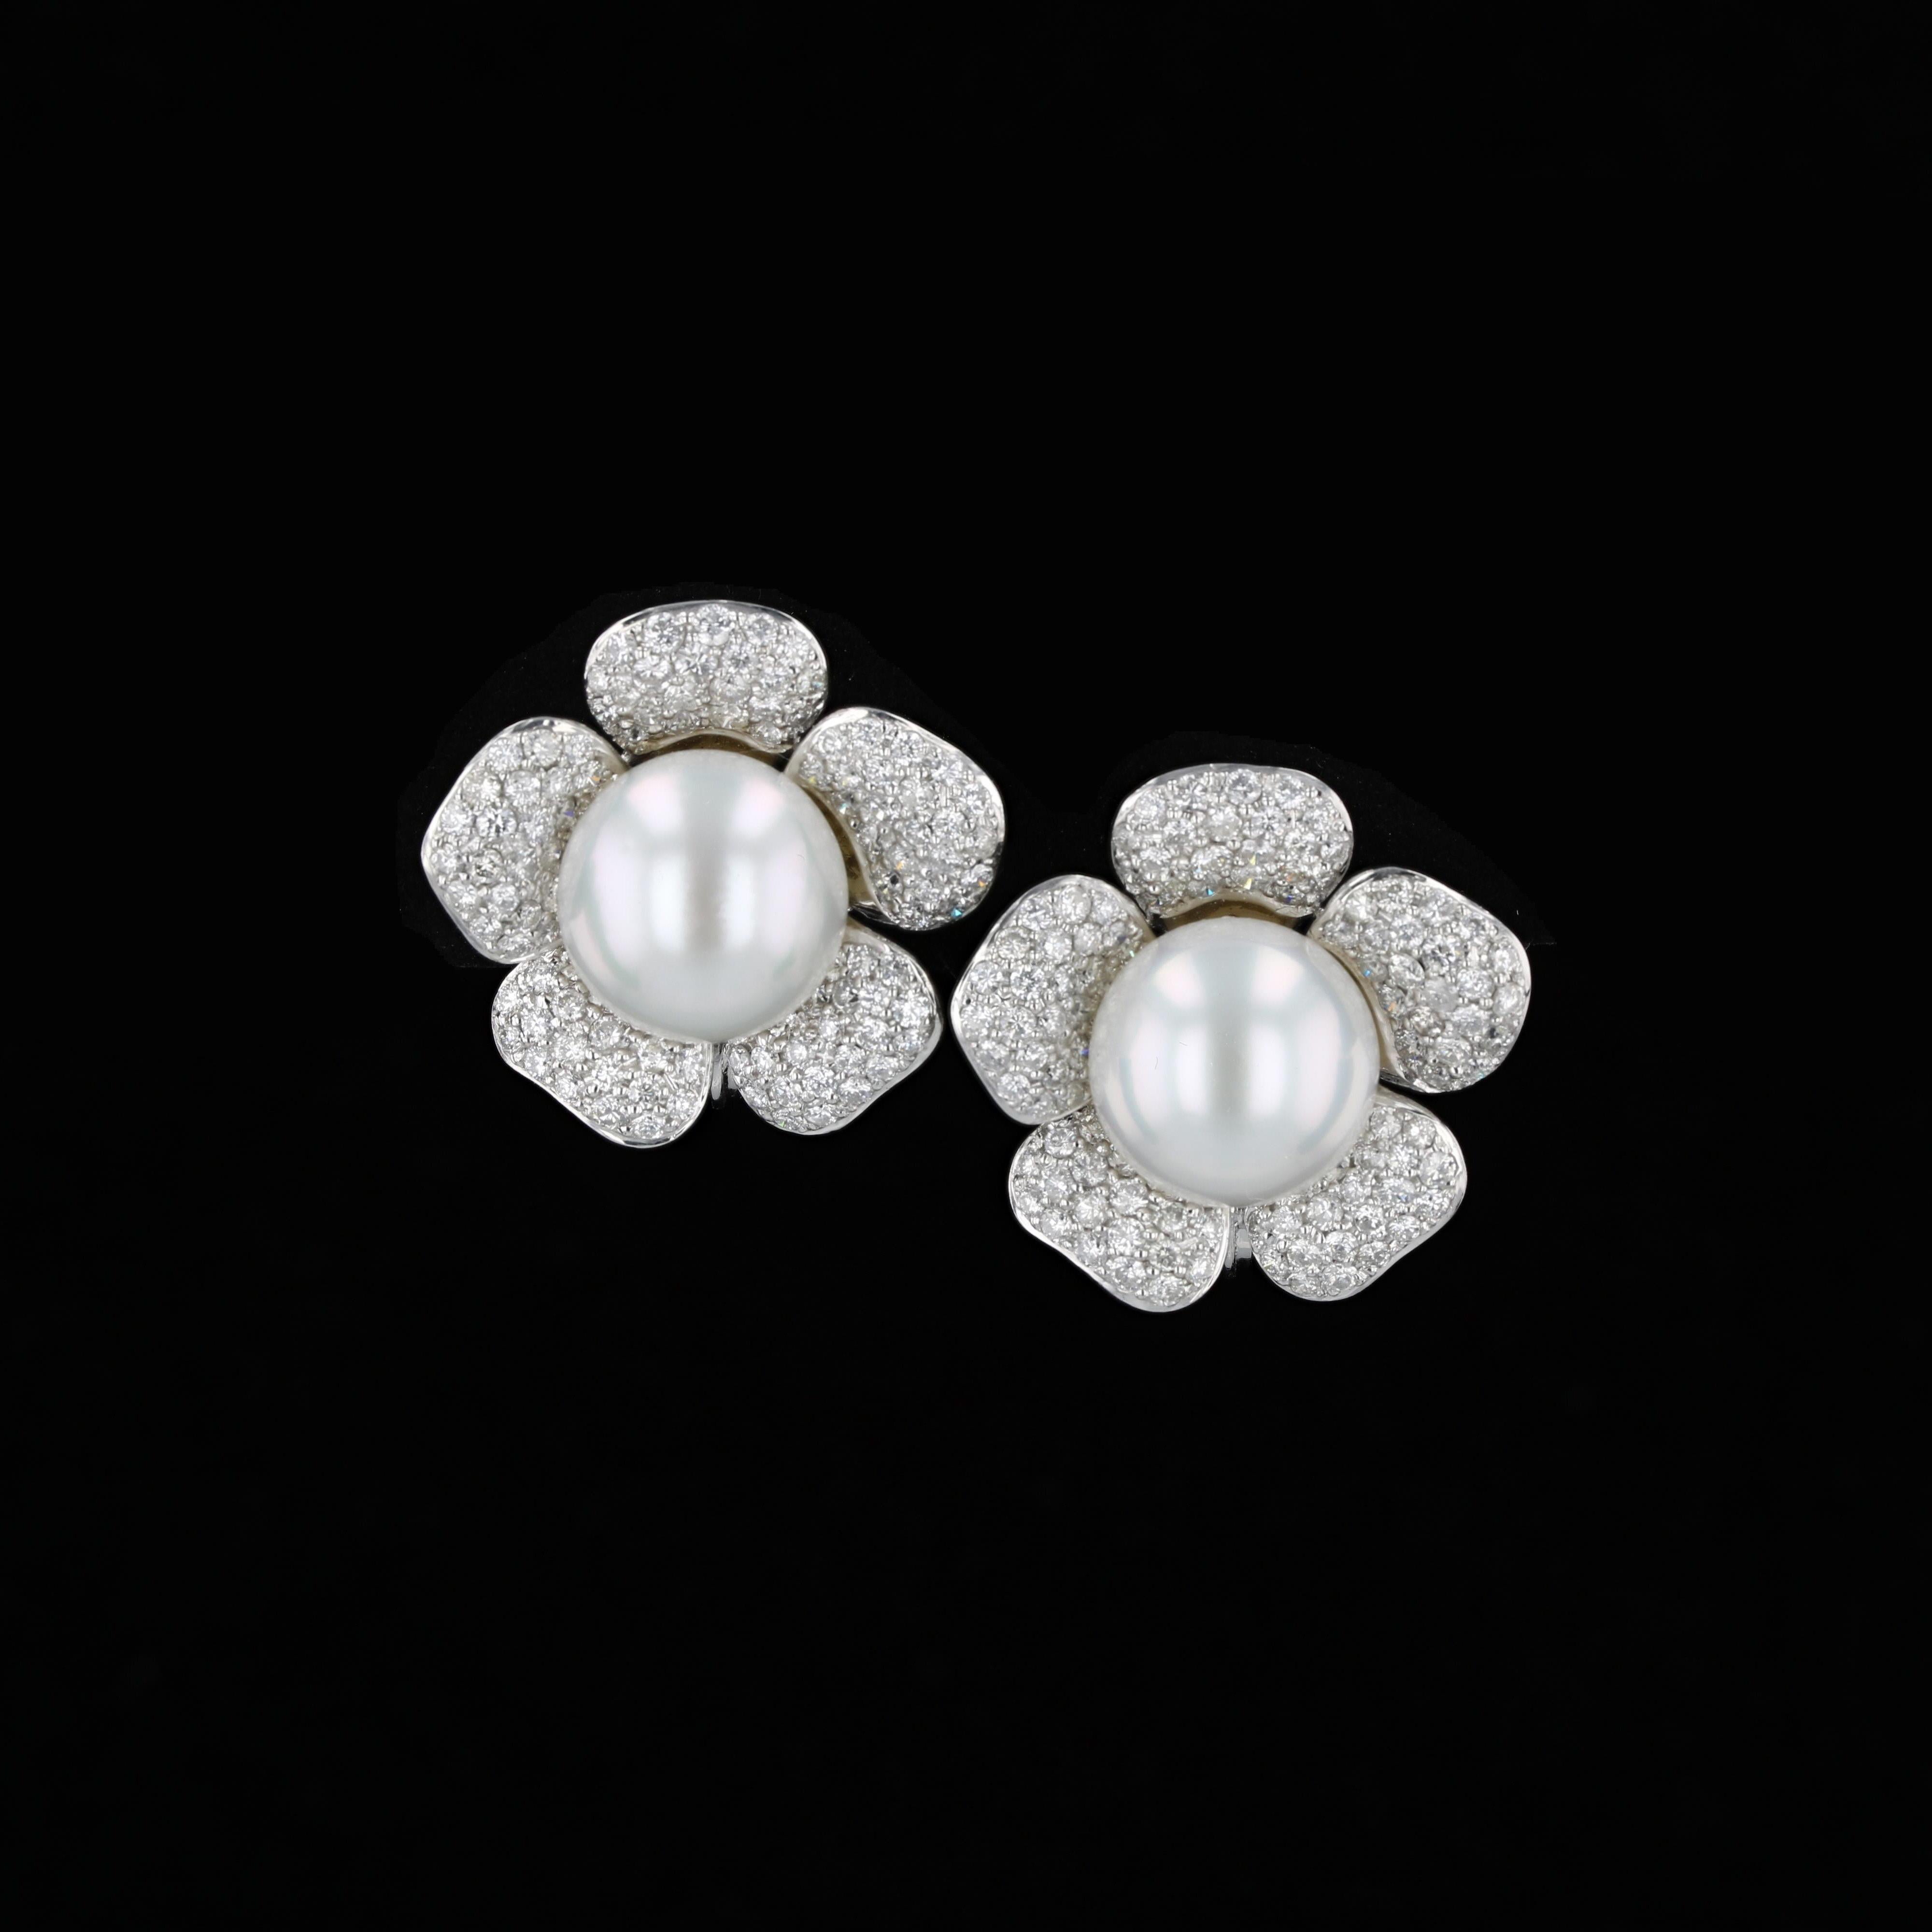 Two 13.50 mm South Sea white pearls center this pair of 18 K white gold flower earrings.  The petals contain 230 round brilliant pave set diamonds weighing approximately 4.83 carats that have an average color of G to H and an average clarity of VS2.